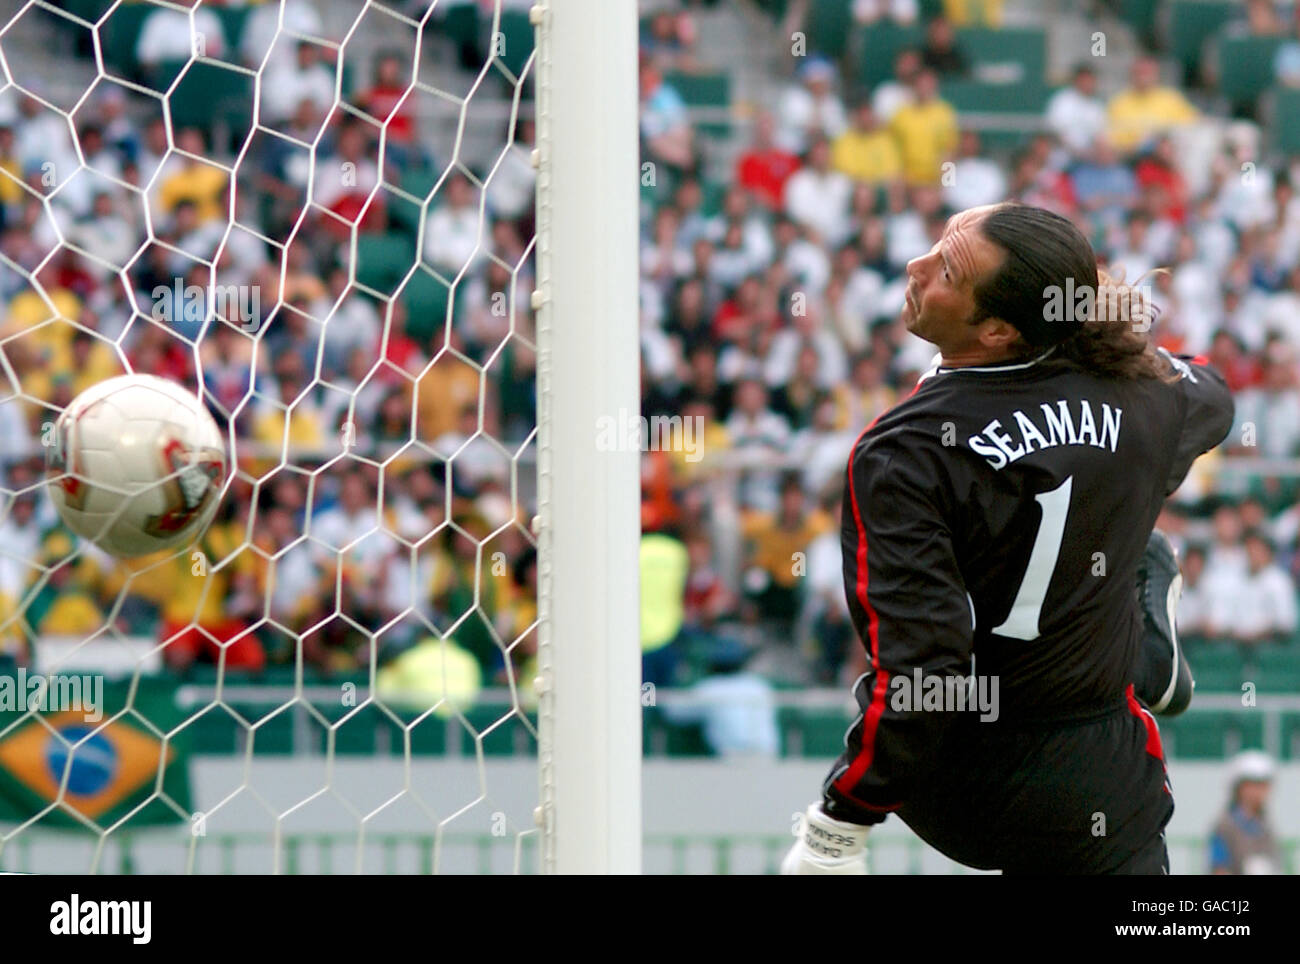 Soccer - FIFA World Cup 2002 - Quarter Final - England v Brazil. England's David Seaman can only watch as he is beaten by Brazil's Ronaldinho for their winning goal from a free-kick. Stock Photo